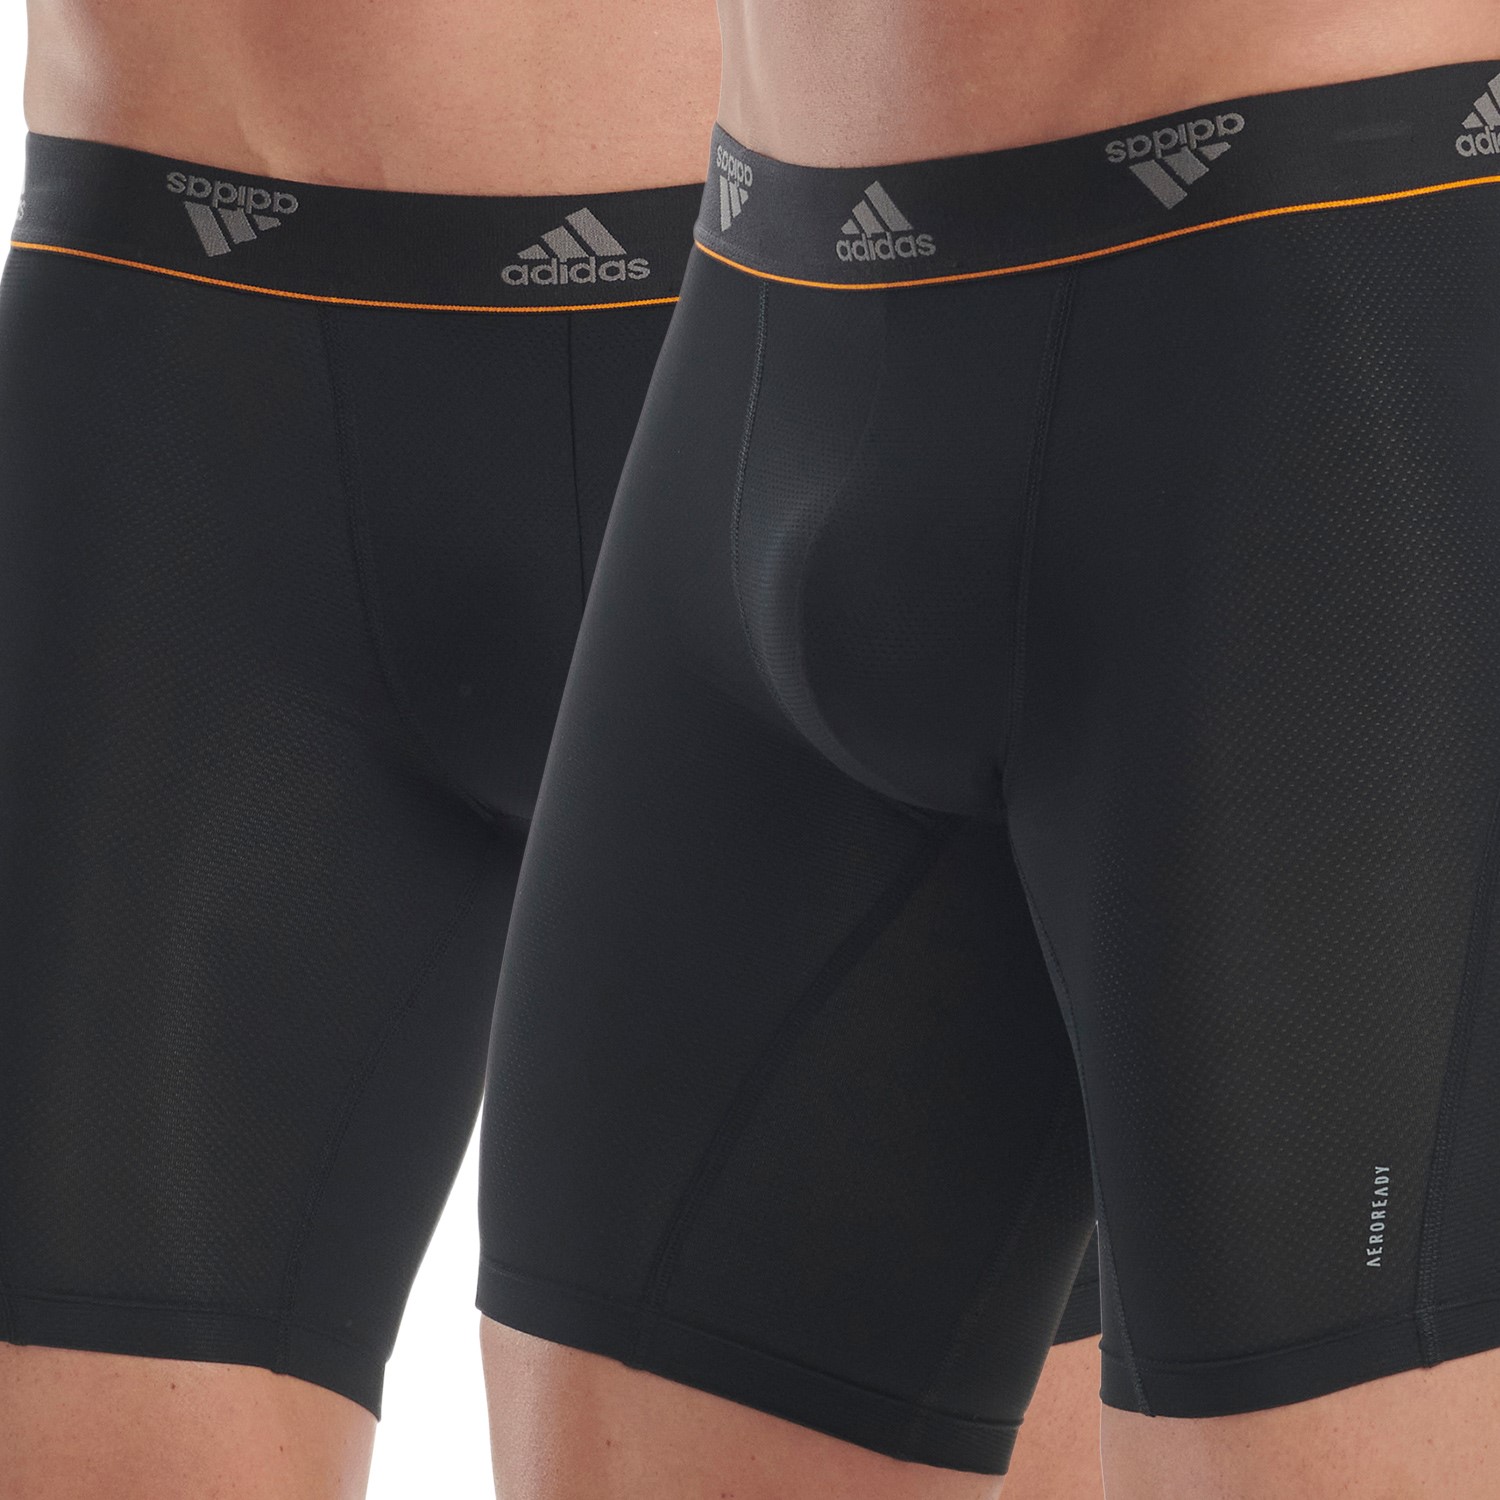 2-Pack Adidas Active Micro Flex Vented Cyclist Boxer - Athletic trunks -  Trunks - Underwear - Timarco.co.uk